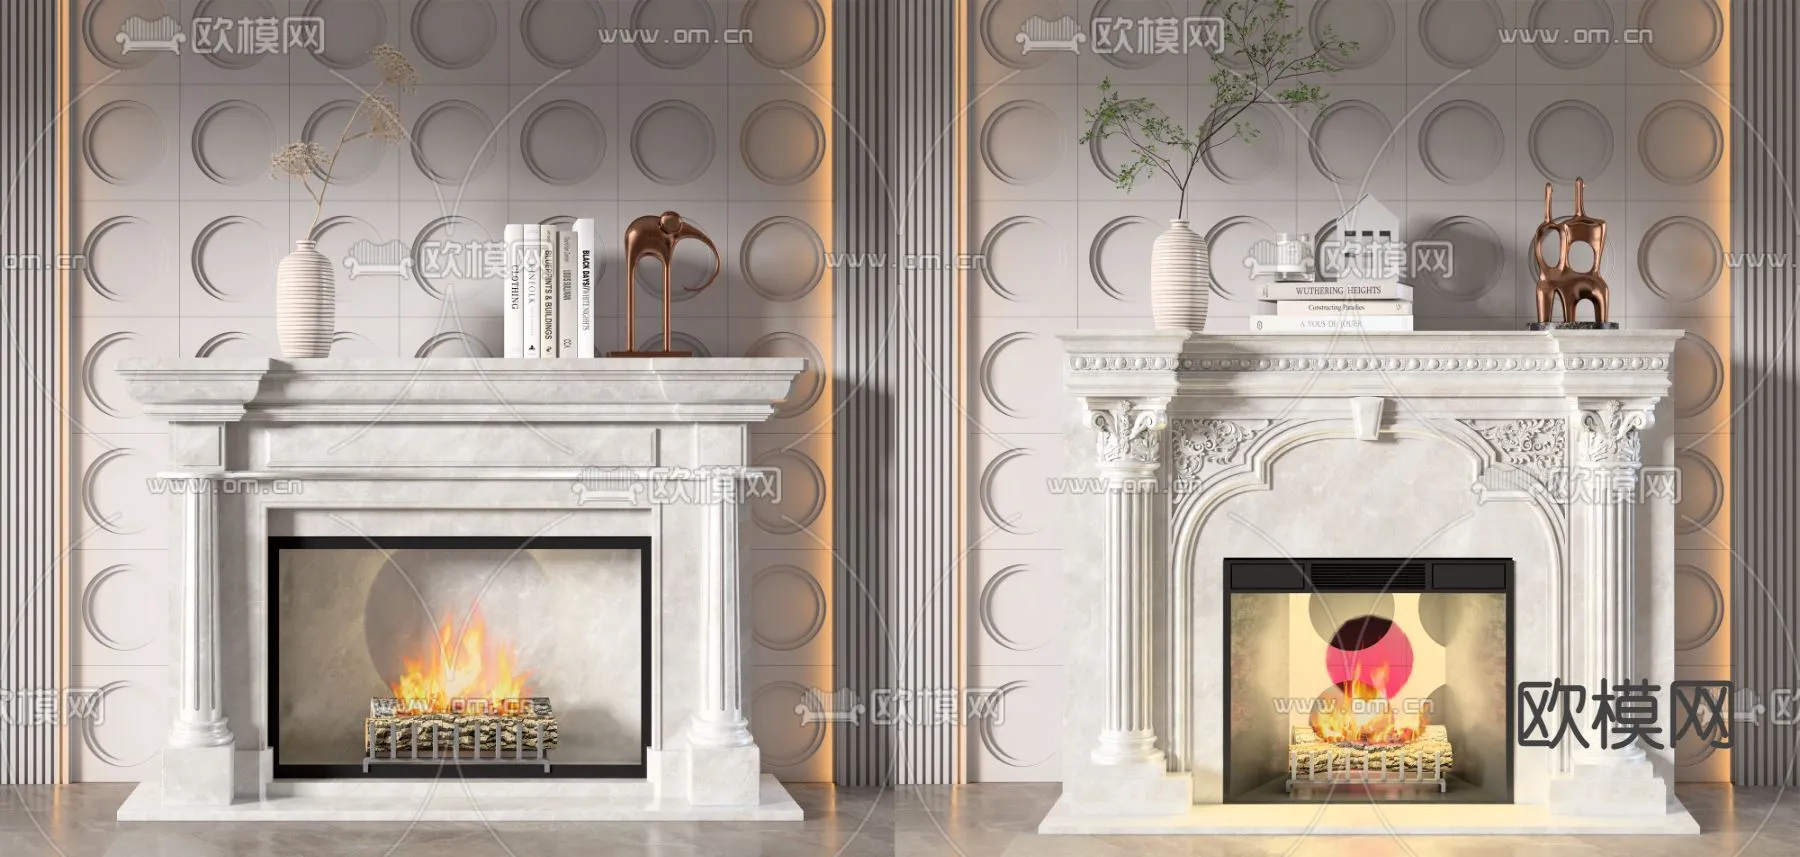 CLASSIC – FIREPLACE 3DMODELS – 074